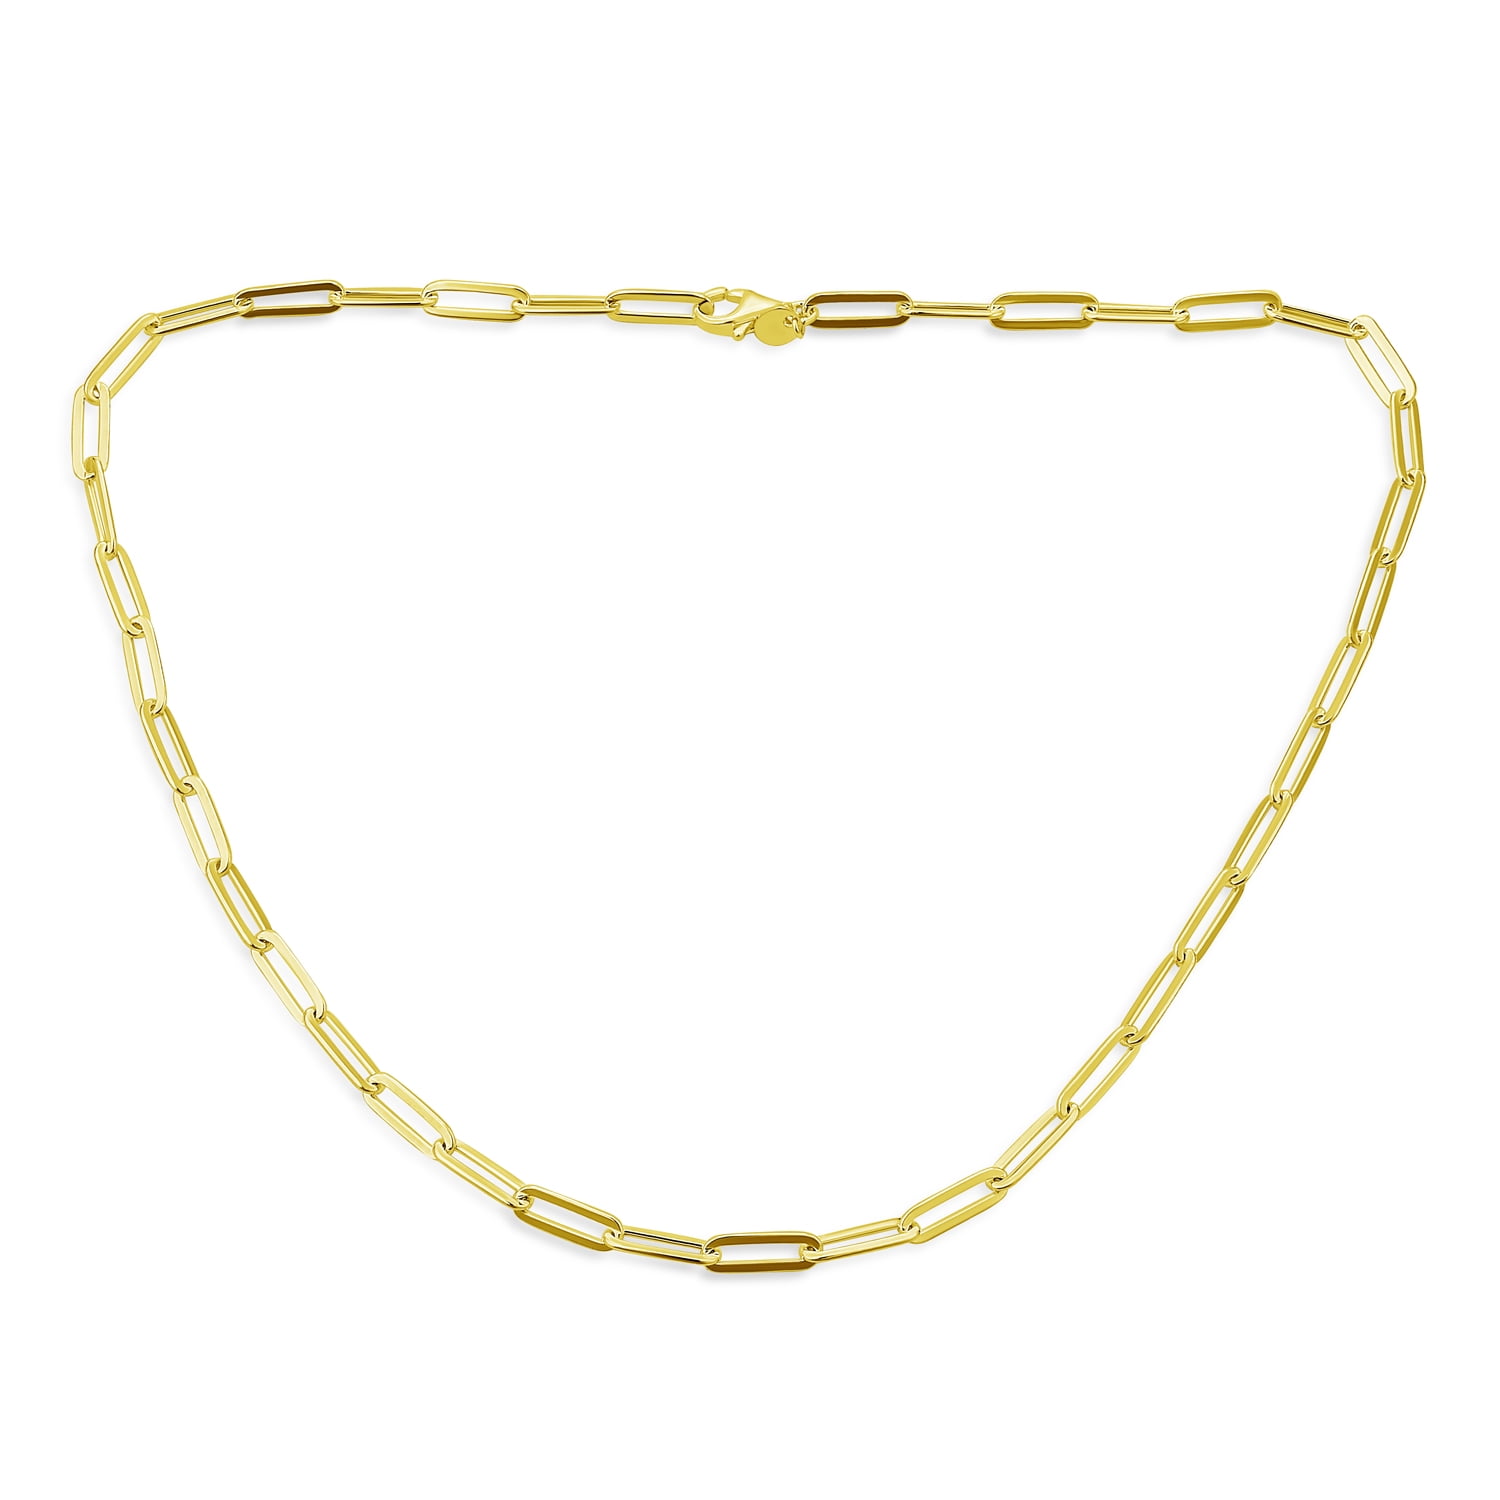 Estate Sterling Silver Yellow Gold Vermeil Chain Necklace 18 Inches 925  Italy | Womens jewelry necklace, Chain necklace, Chains necklace